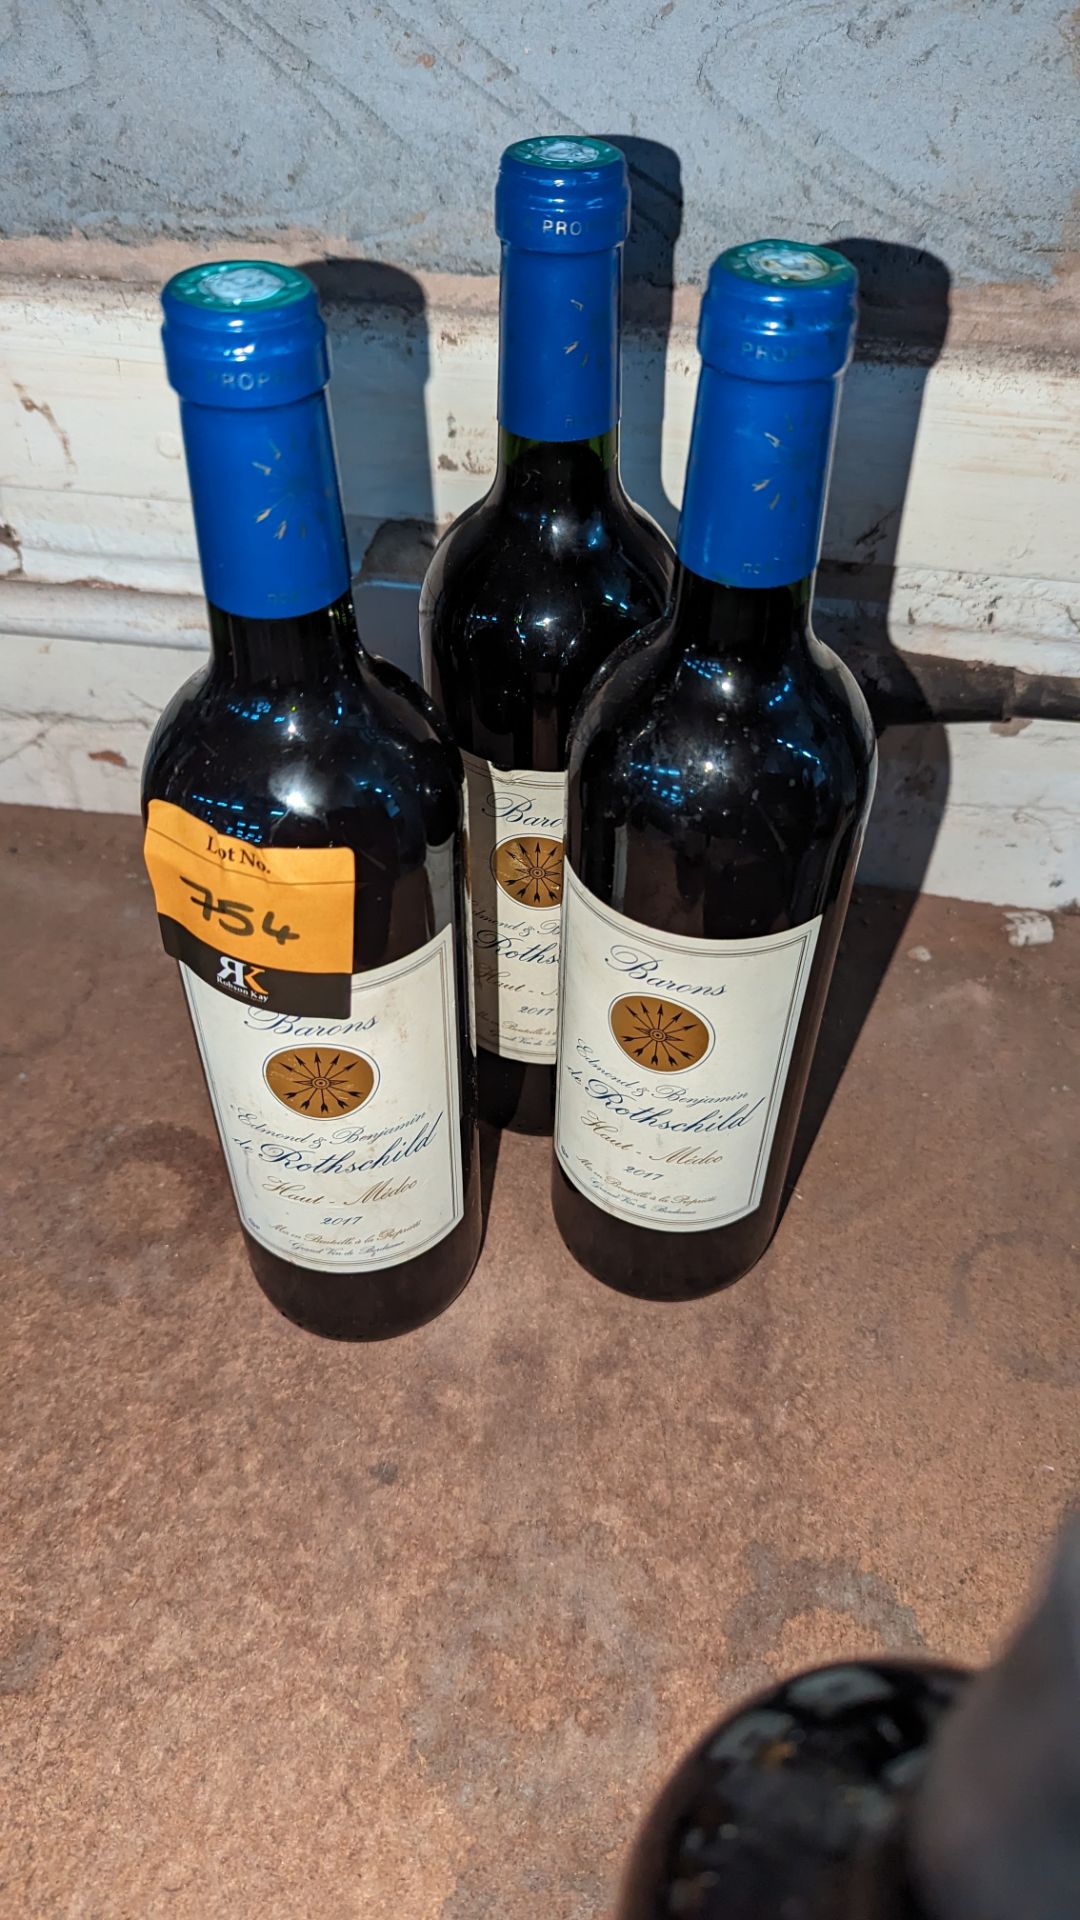 3 bottles of 2017 Barons Rothschild Haut-Médoc French red wine sold under AWRS number XQAW0000010101 - Image 3 of 3